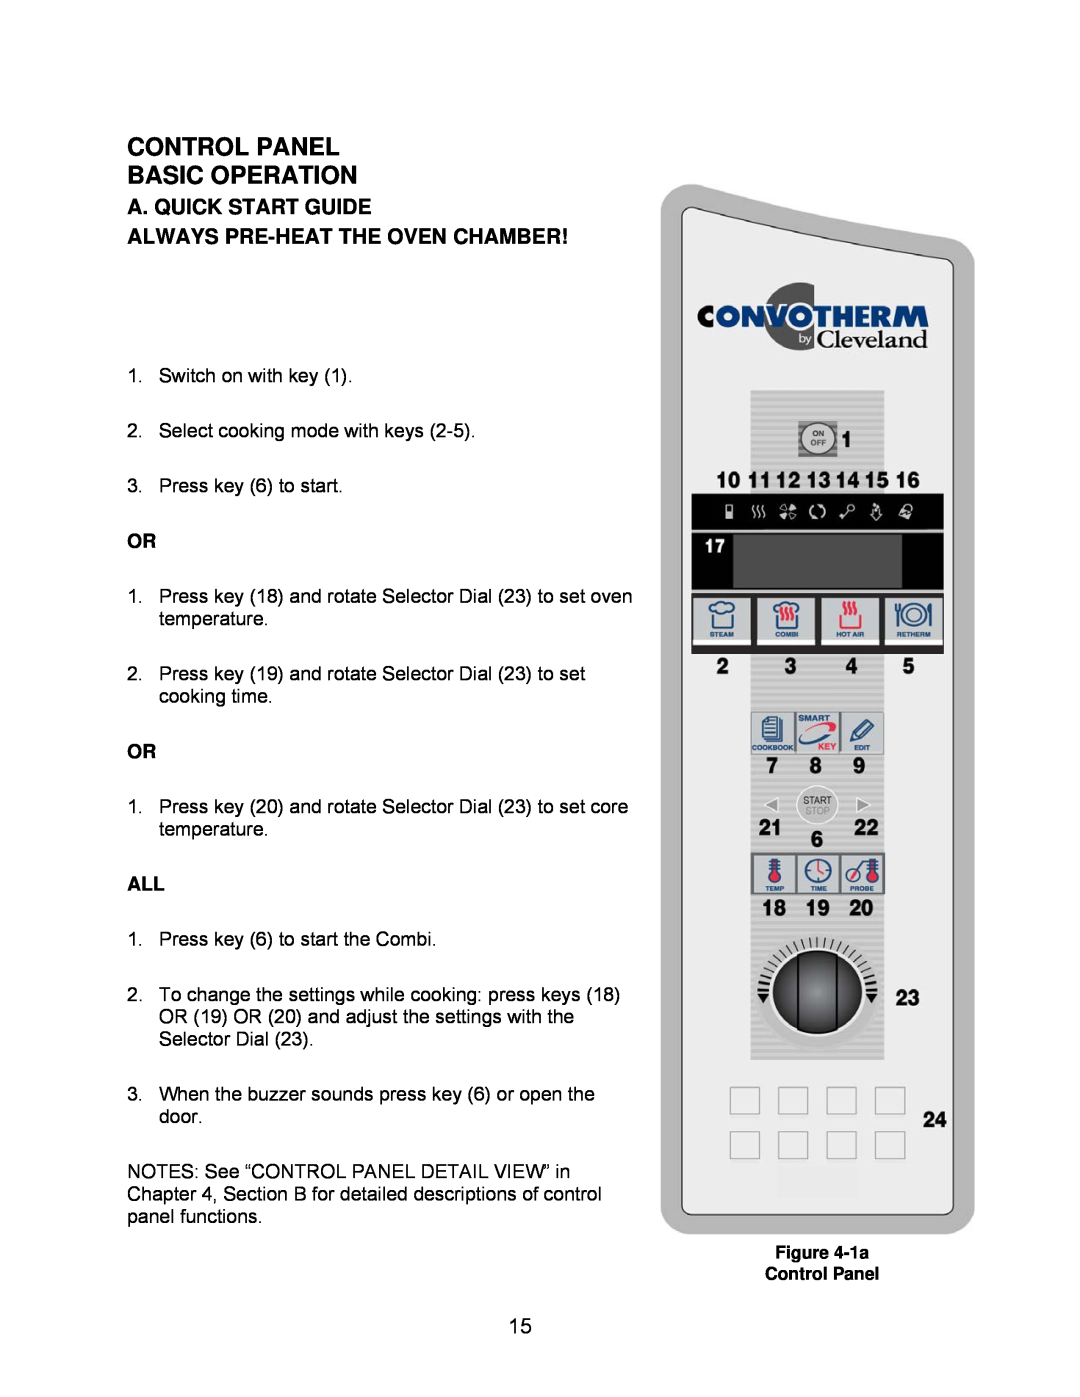 Cleveland Range OGS-10.10, OGB-6.20 Control Panel Basic Operation, A. Quick Start Guide Always Pre-Heat The Oven Chamber 